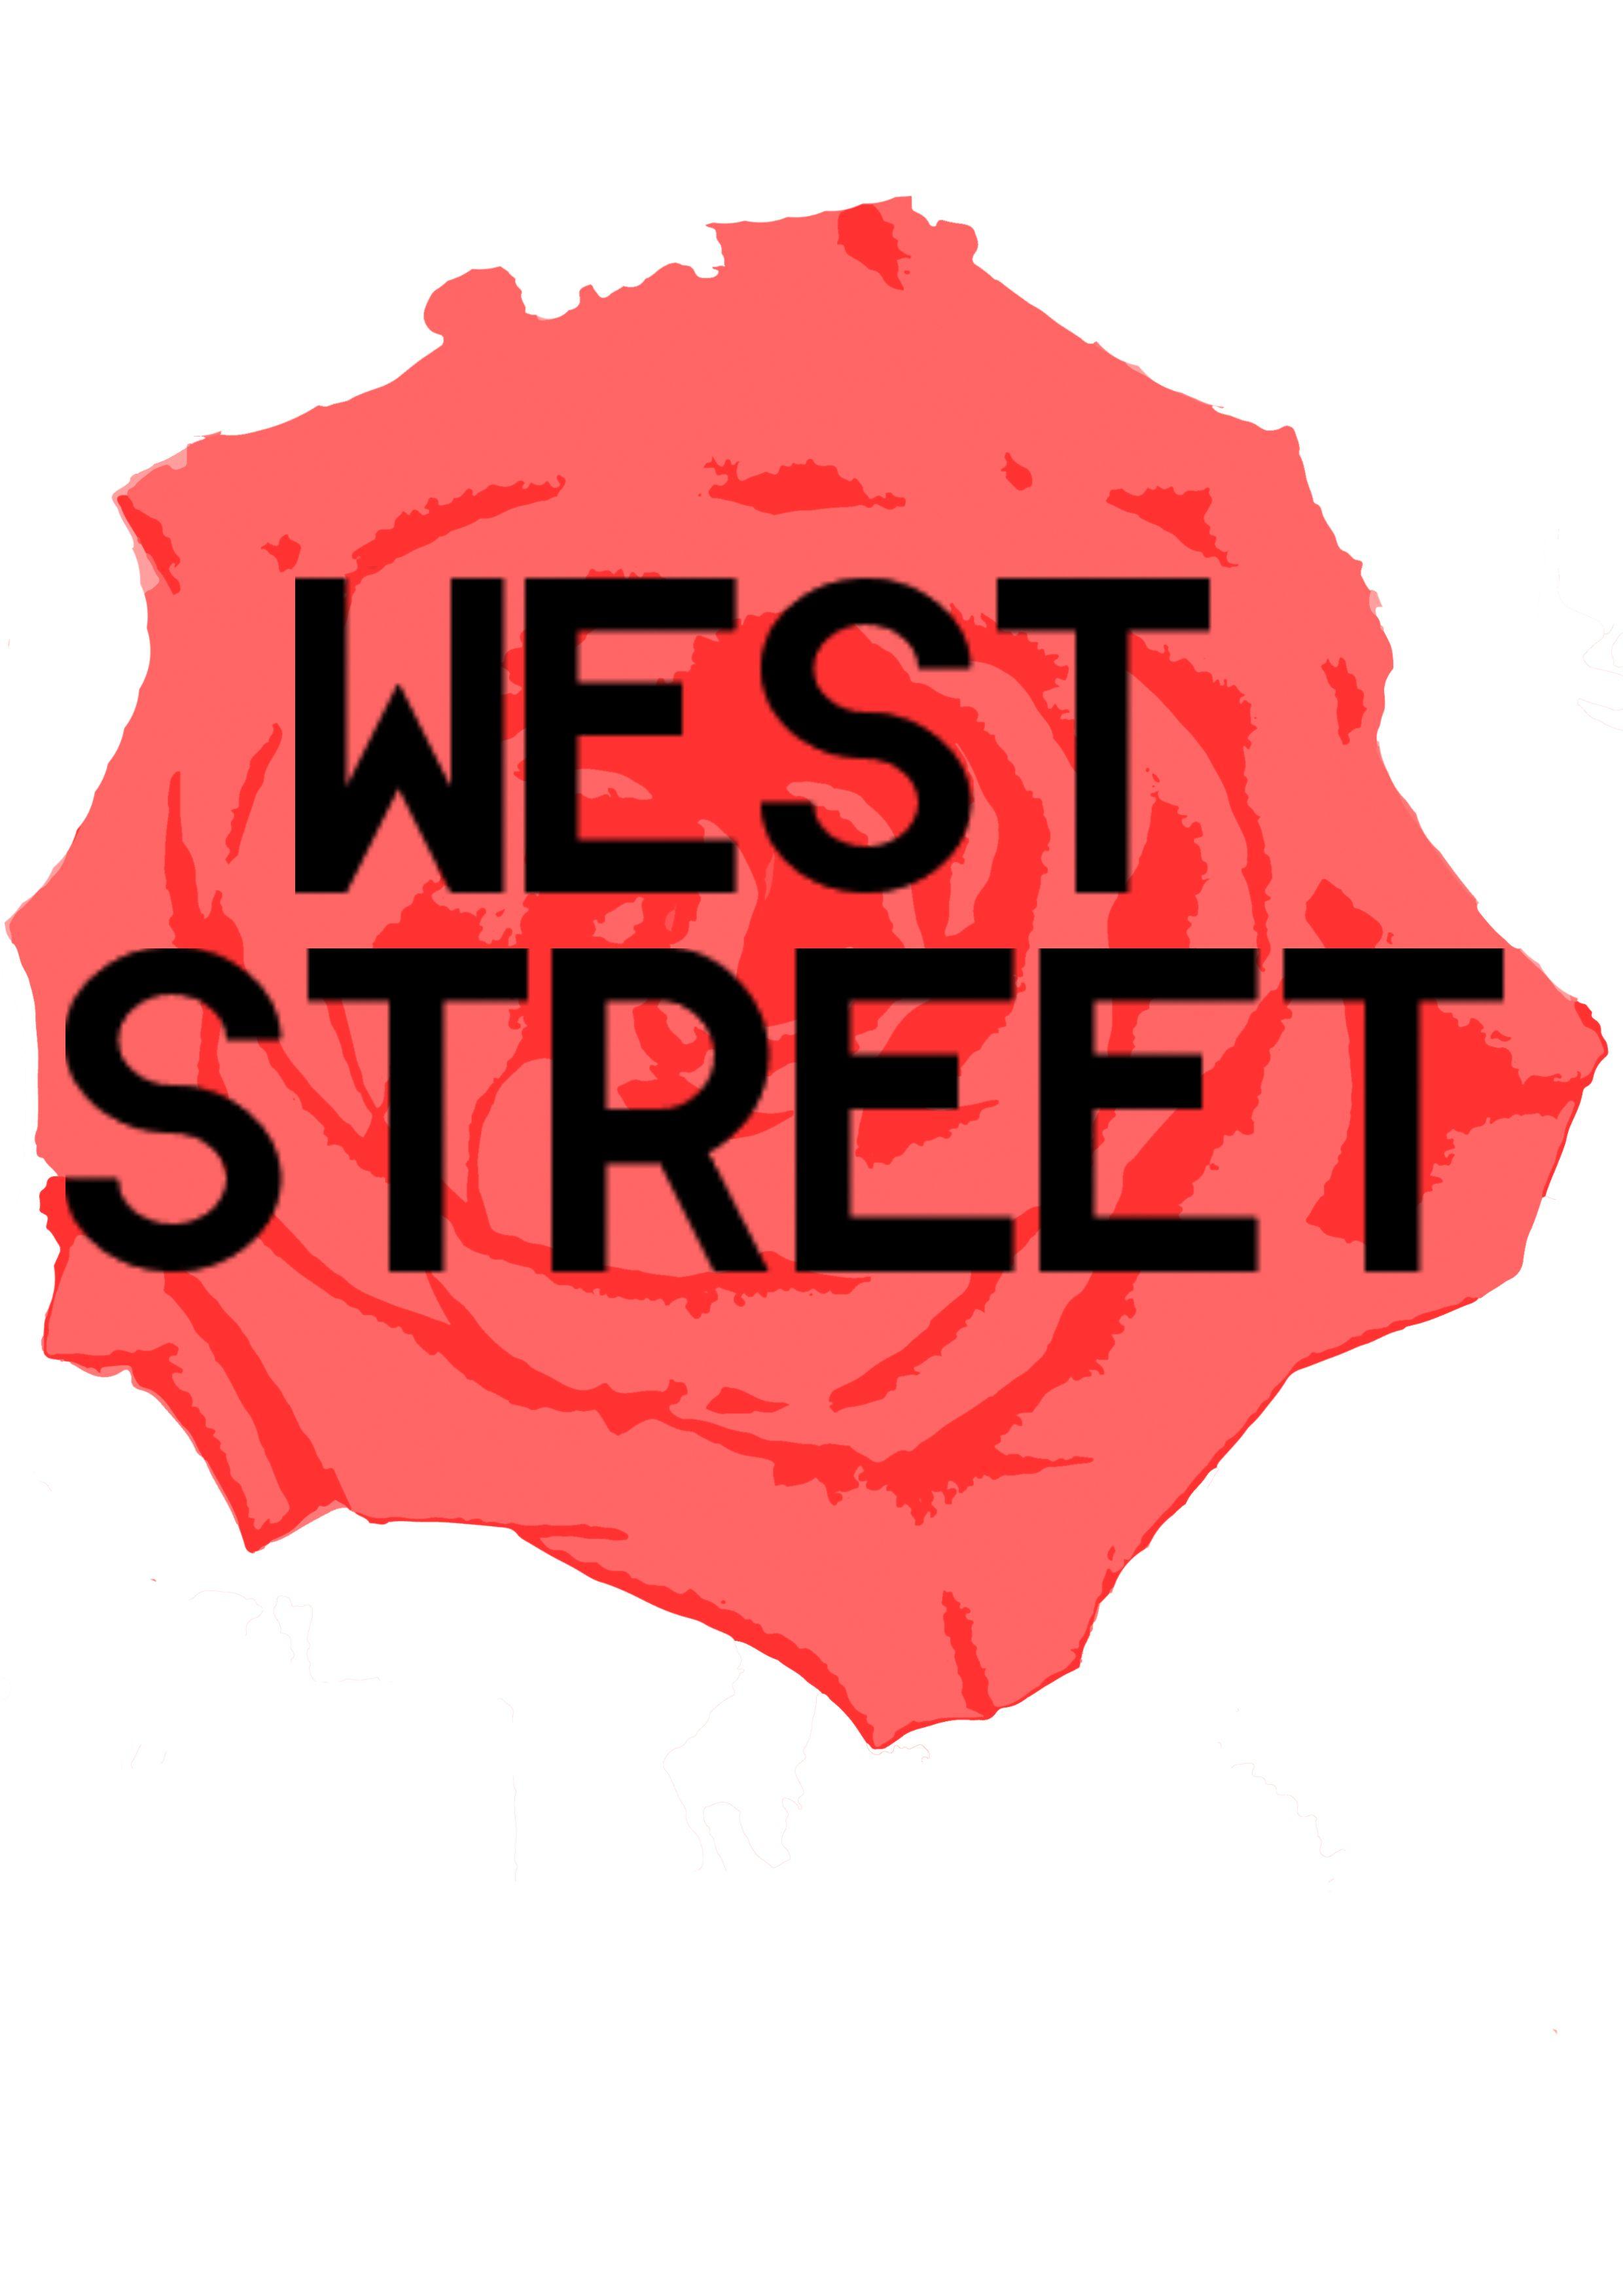 Red Clothing Brand Logo - Personal clothing brand logo. West Street with red rose logo | New ...